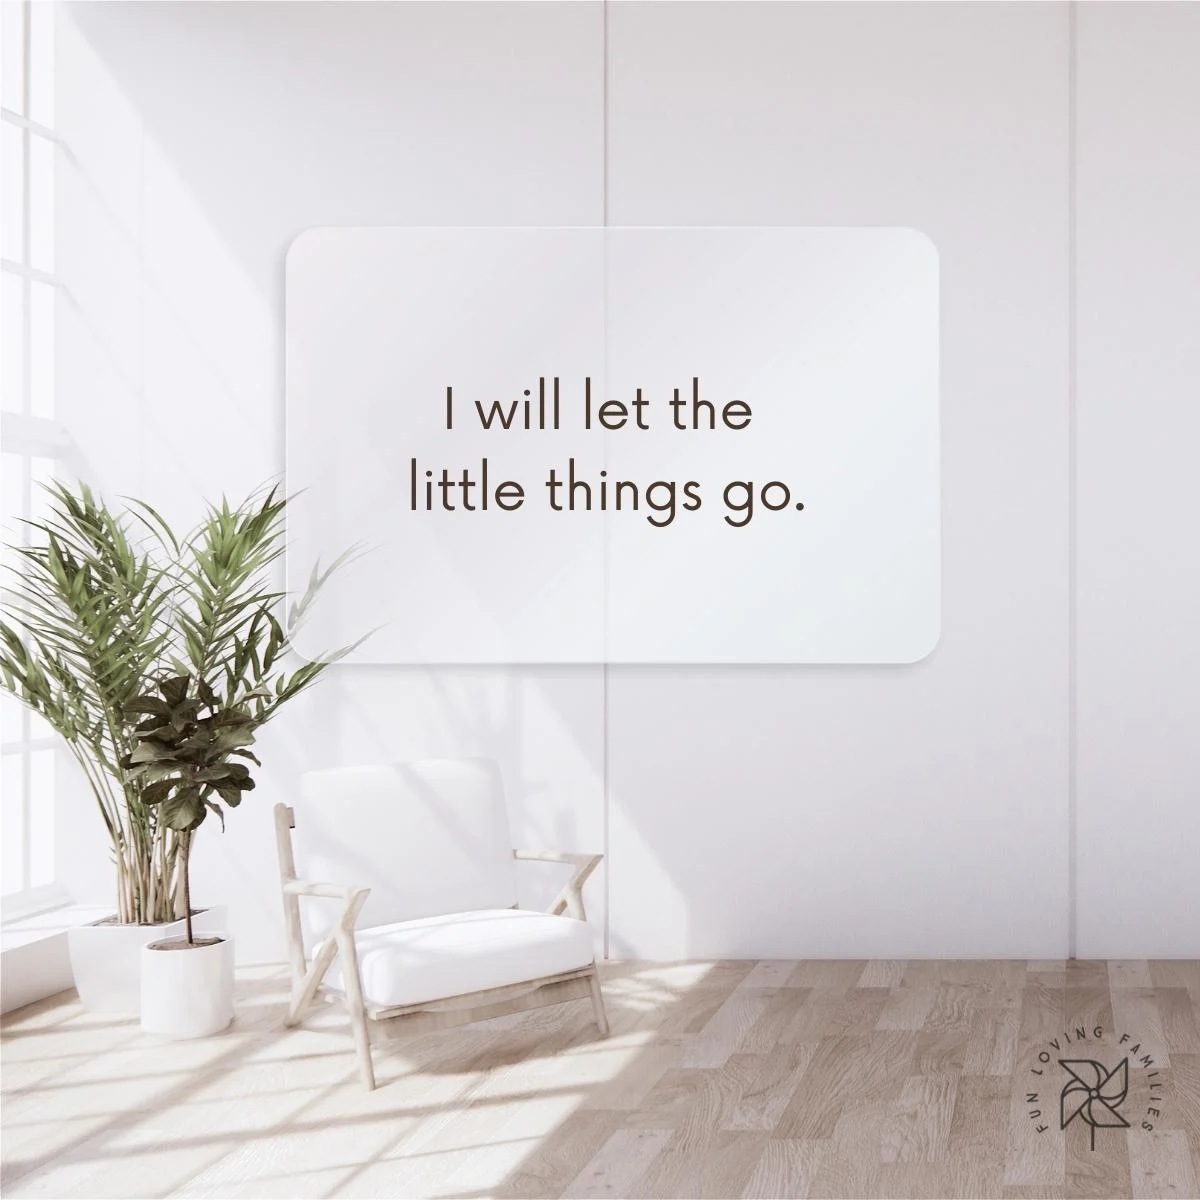 I will let the little things go affirmation